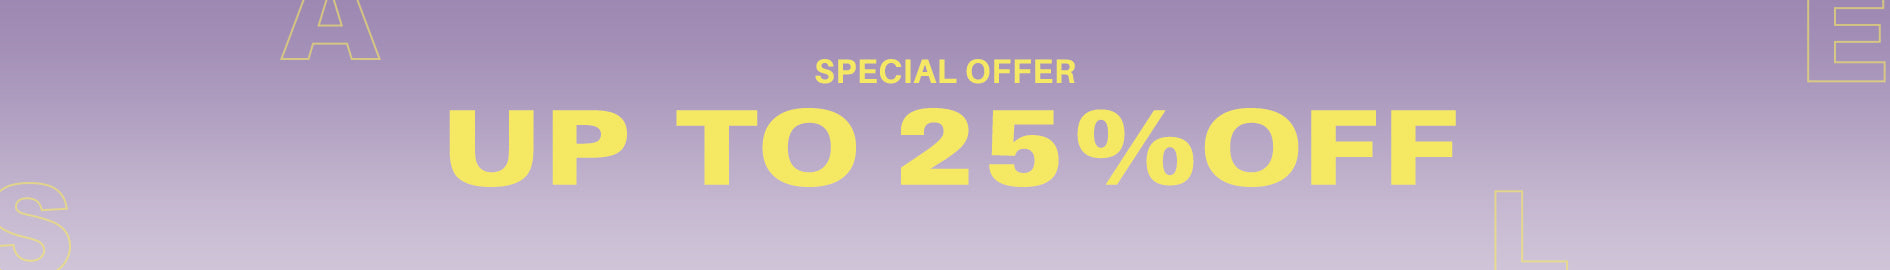 SPECIAL OFFER- UP TO 25% OFF